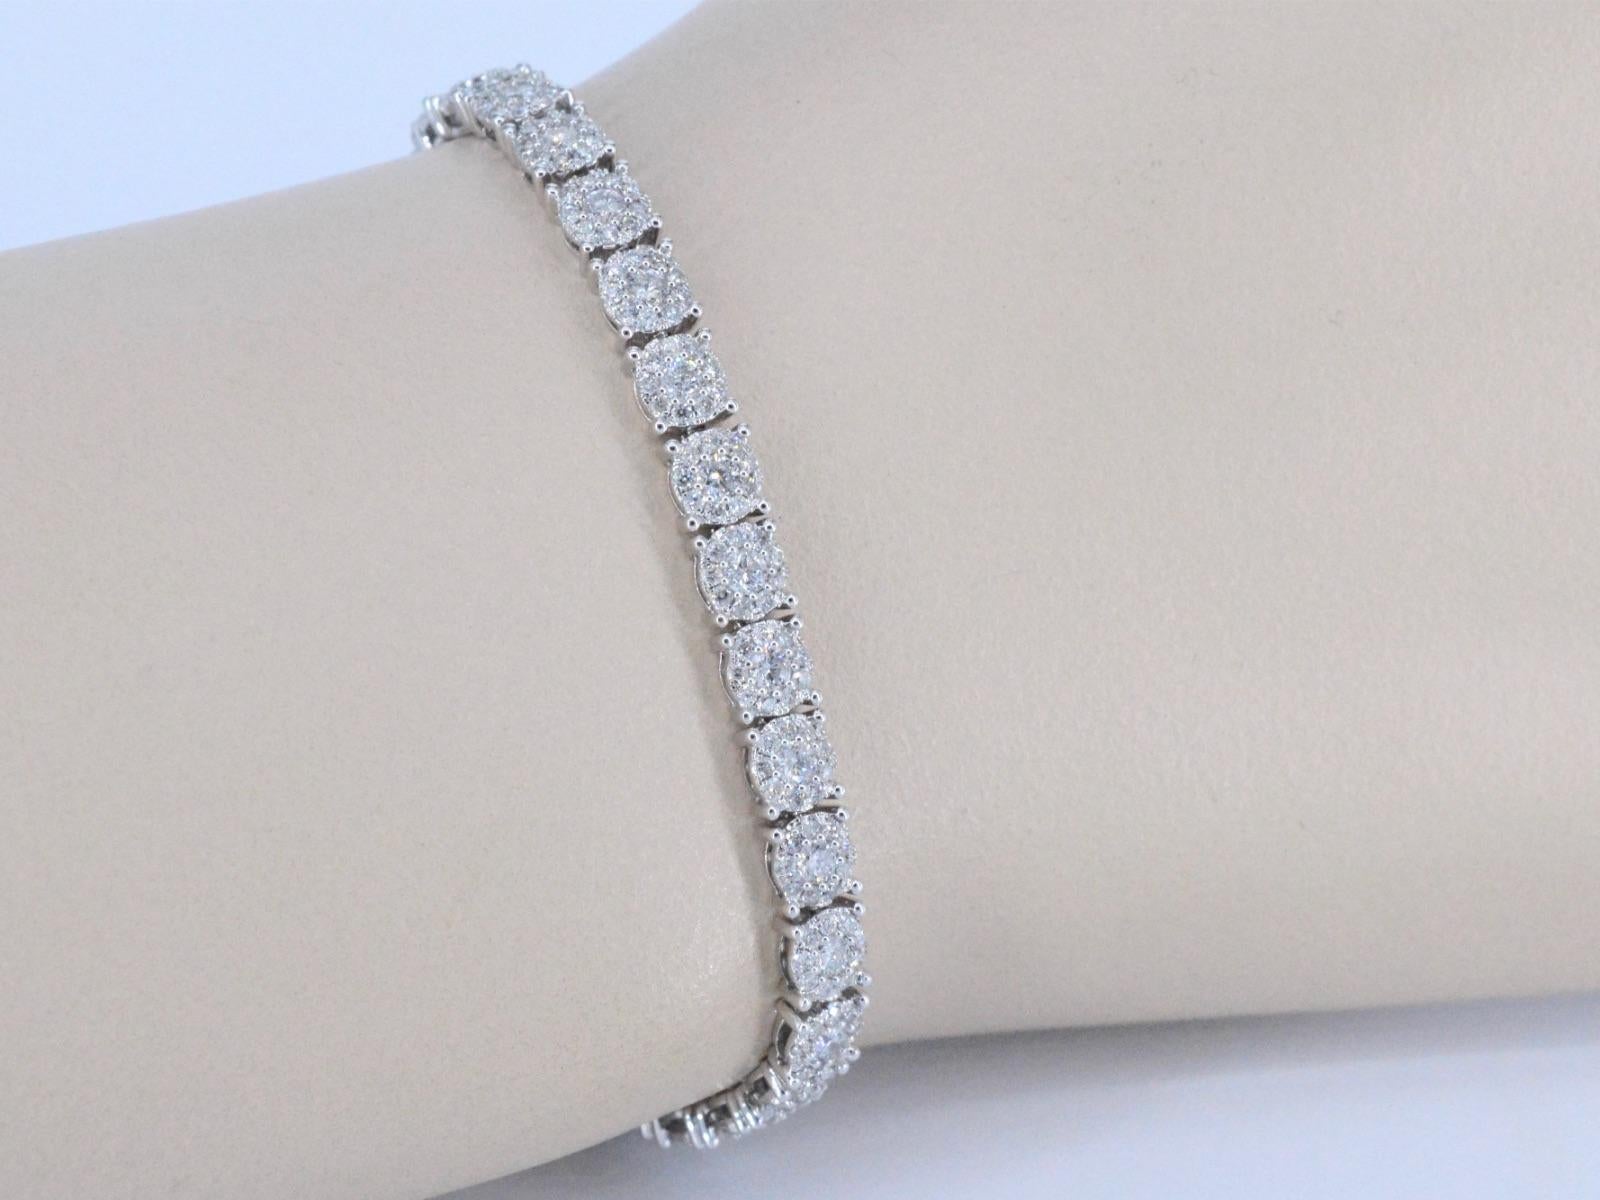 Introducing the stunning white gold tennis bracelet with 4.00 carats of brilliant diamonds, perfect for adding a touch of luxury to any outfit. The beautiful diamonds are of exceptional quality, boasting F-G color and SI-P clarity, expertly cut to